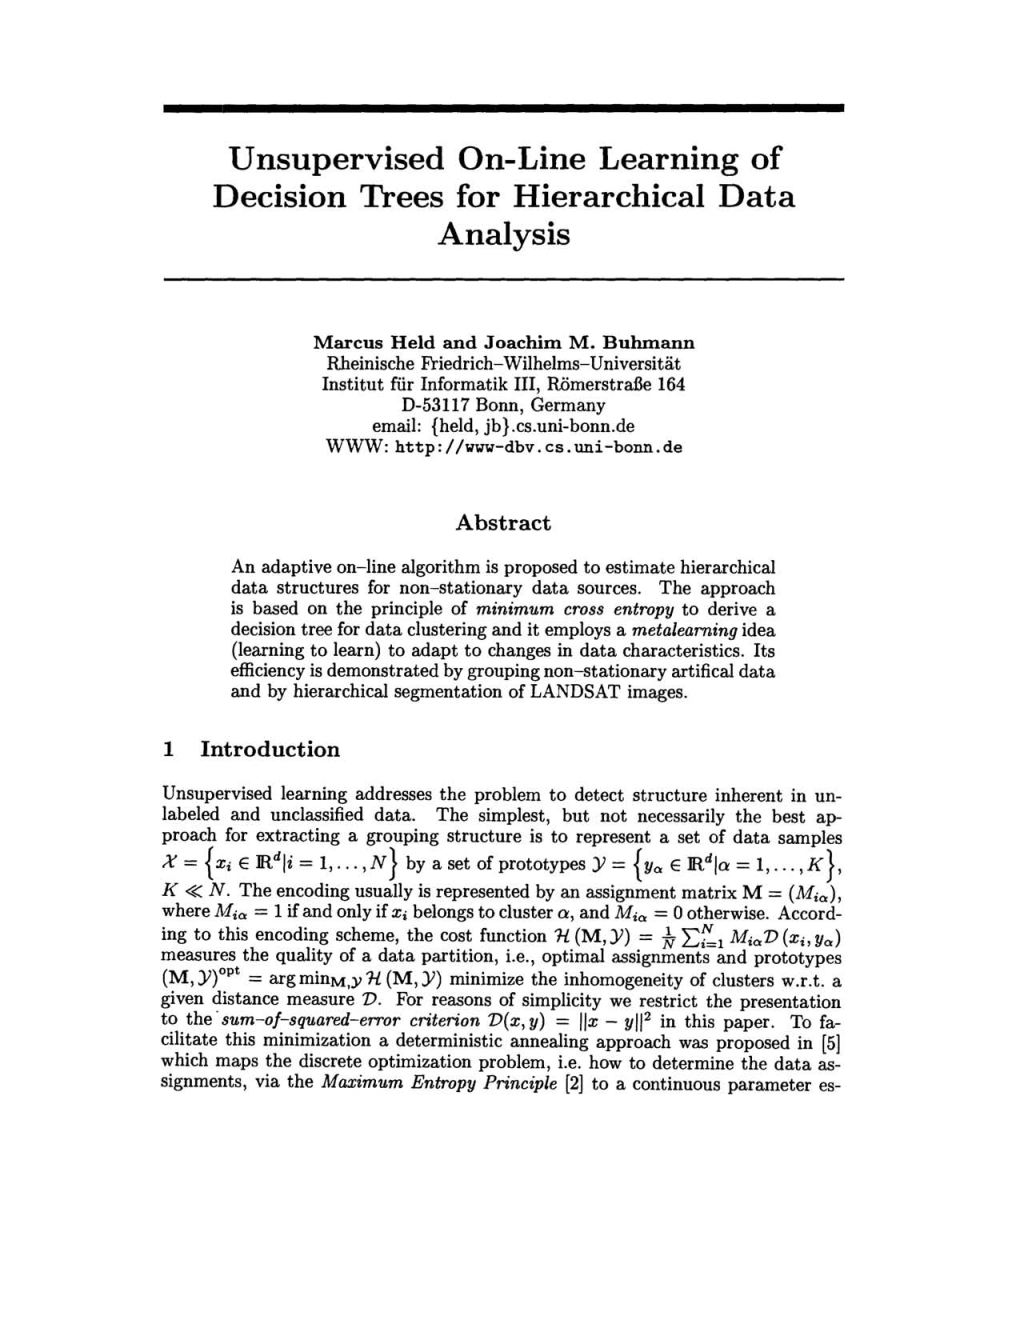 Unsupervised On-Line Learning of Decision Trees for Hierarchical Data Analysis